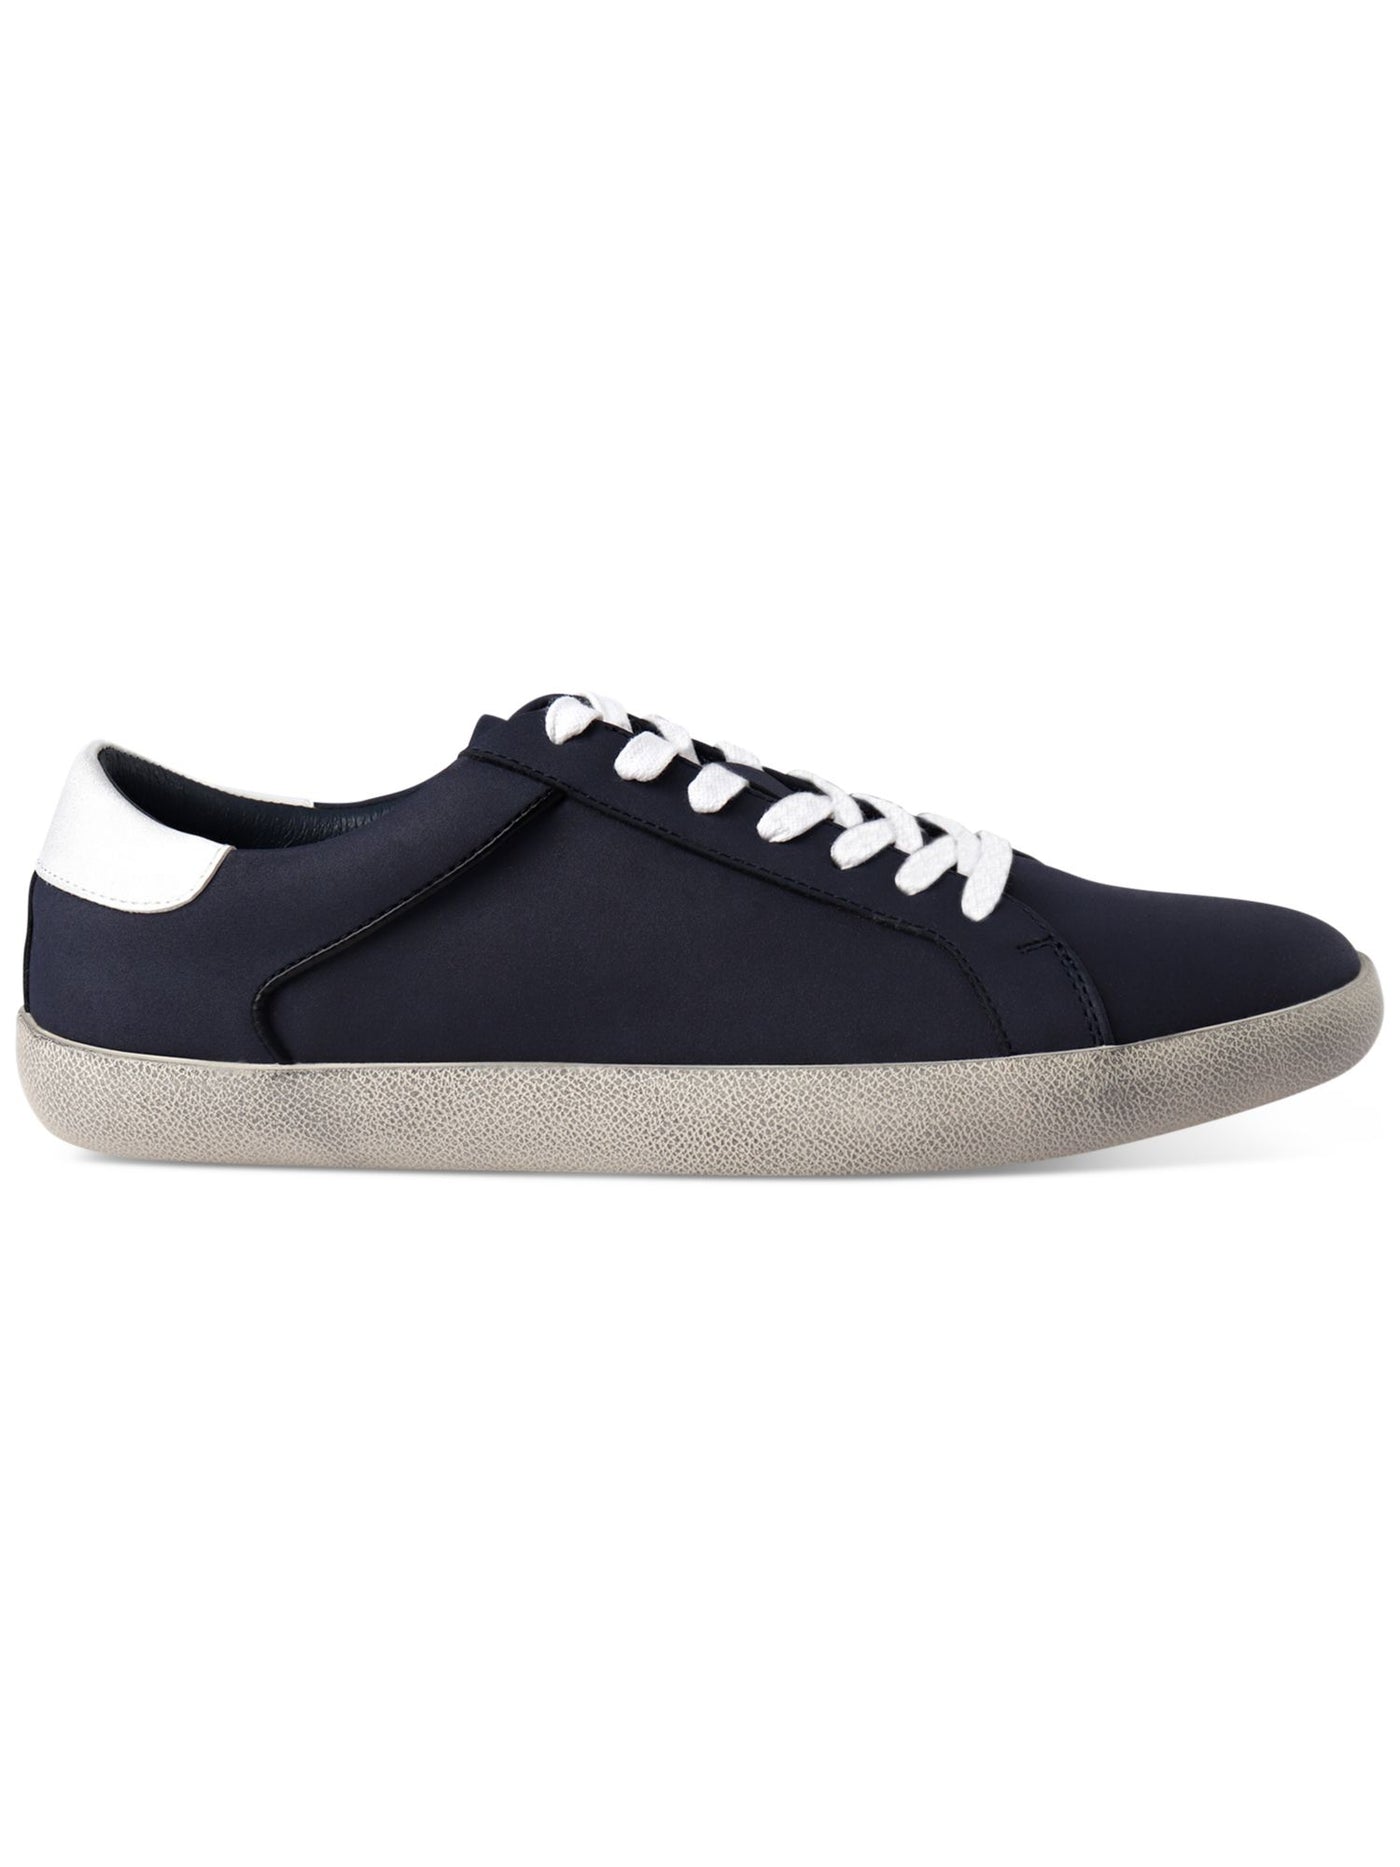 INC Mens Navy Padded Damon Round Toe Lace-Up Sneakers Shoes 13 M